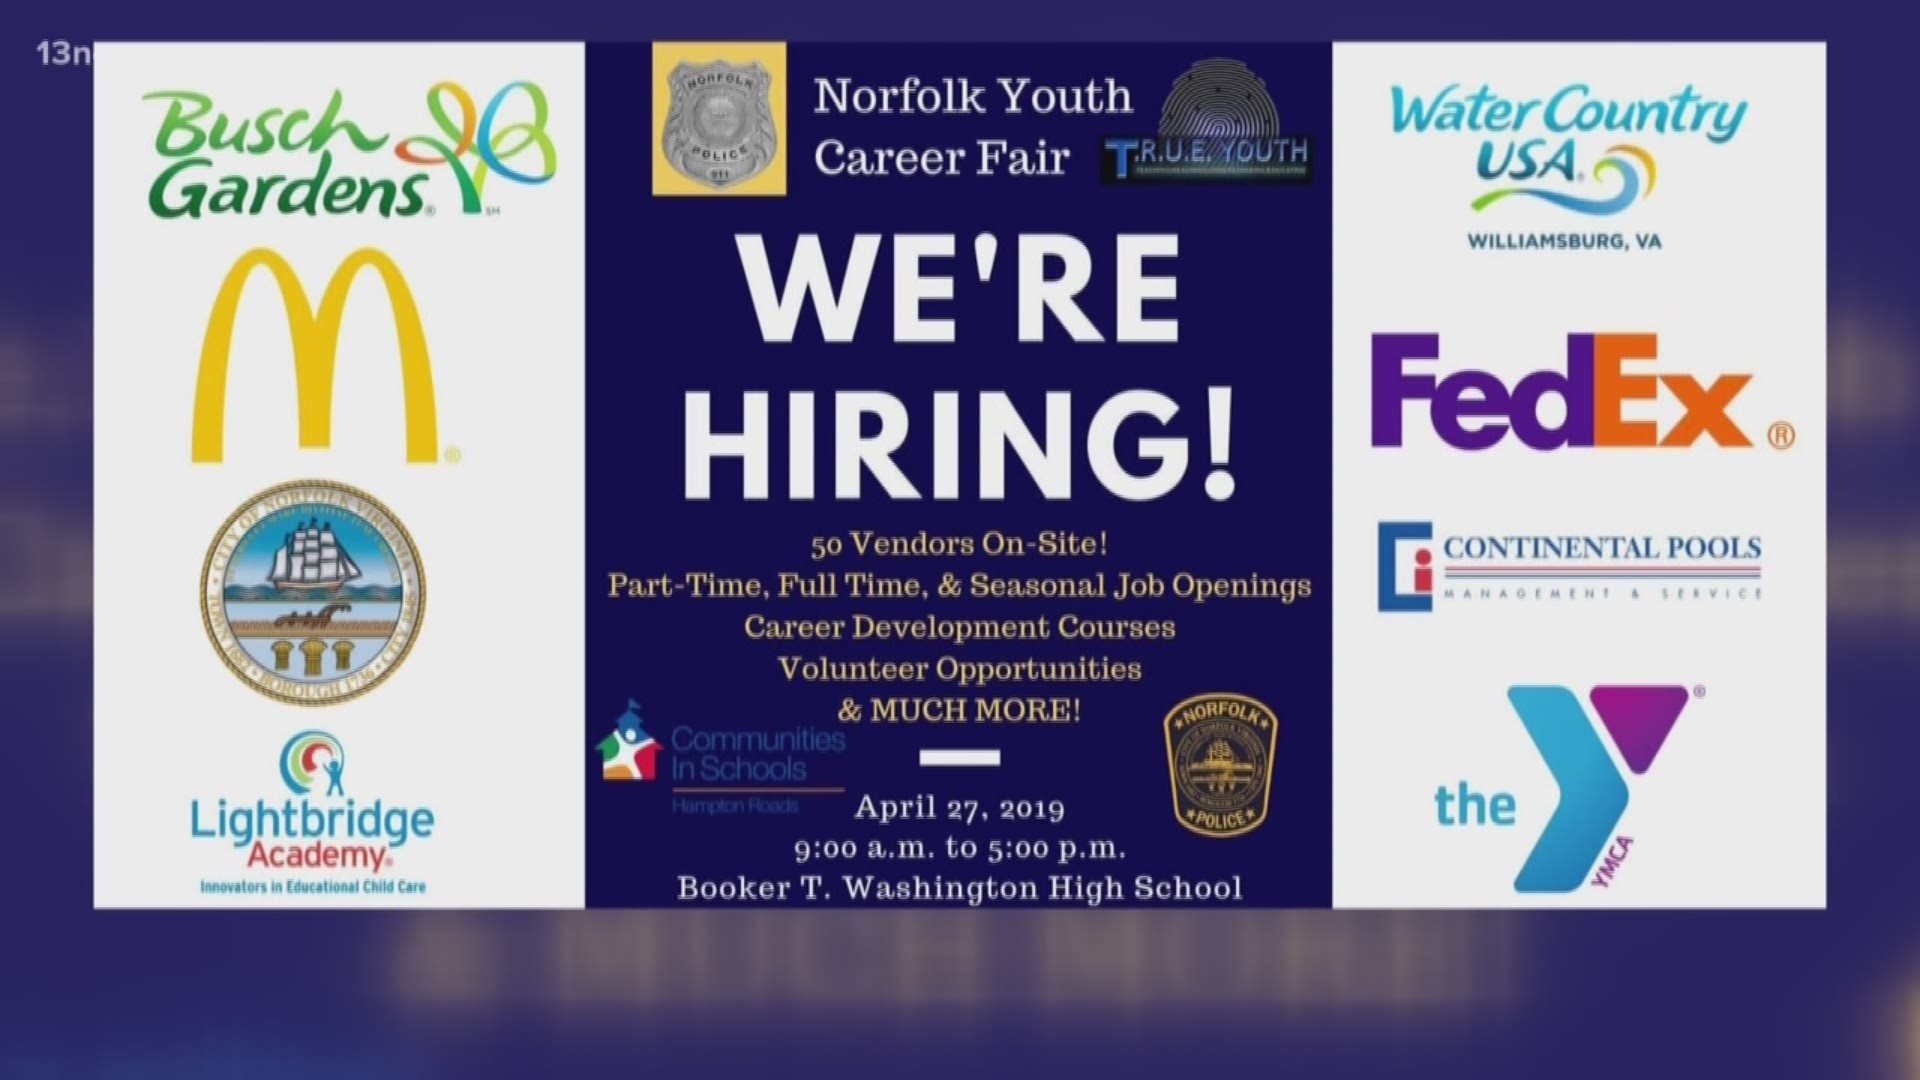 The Norfolk Police Department will host a career fair for youth as part of the agency's TRUE youth community outreach project.